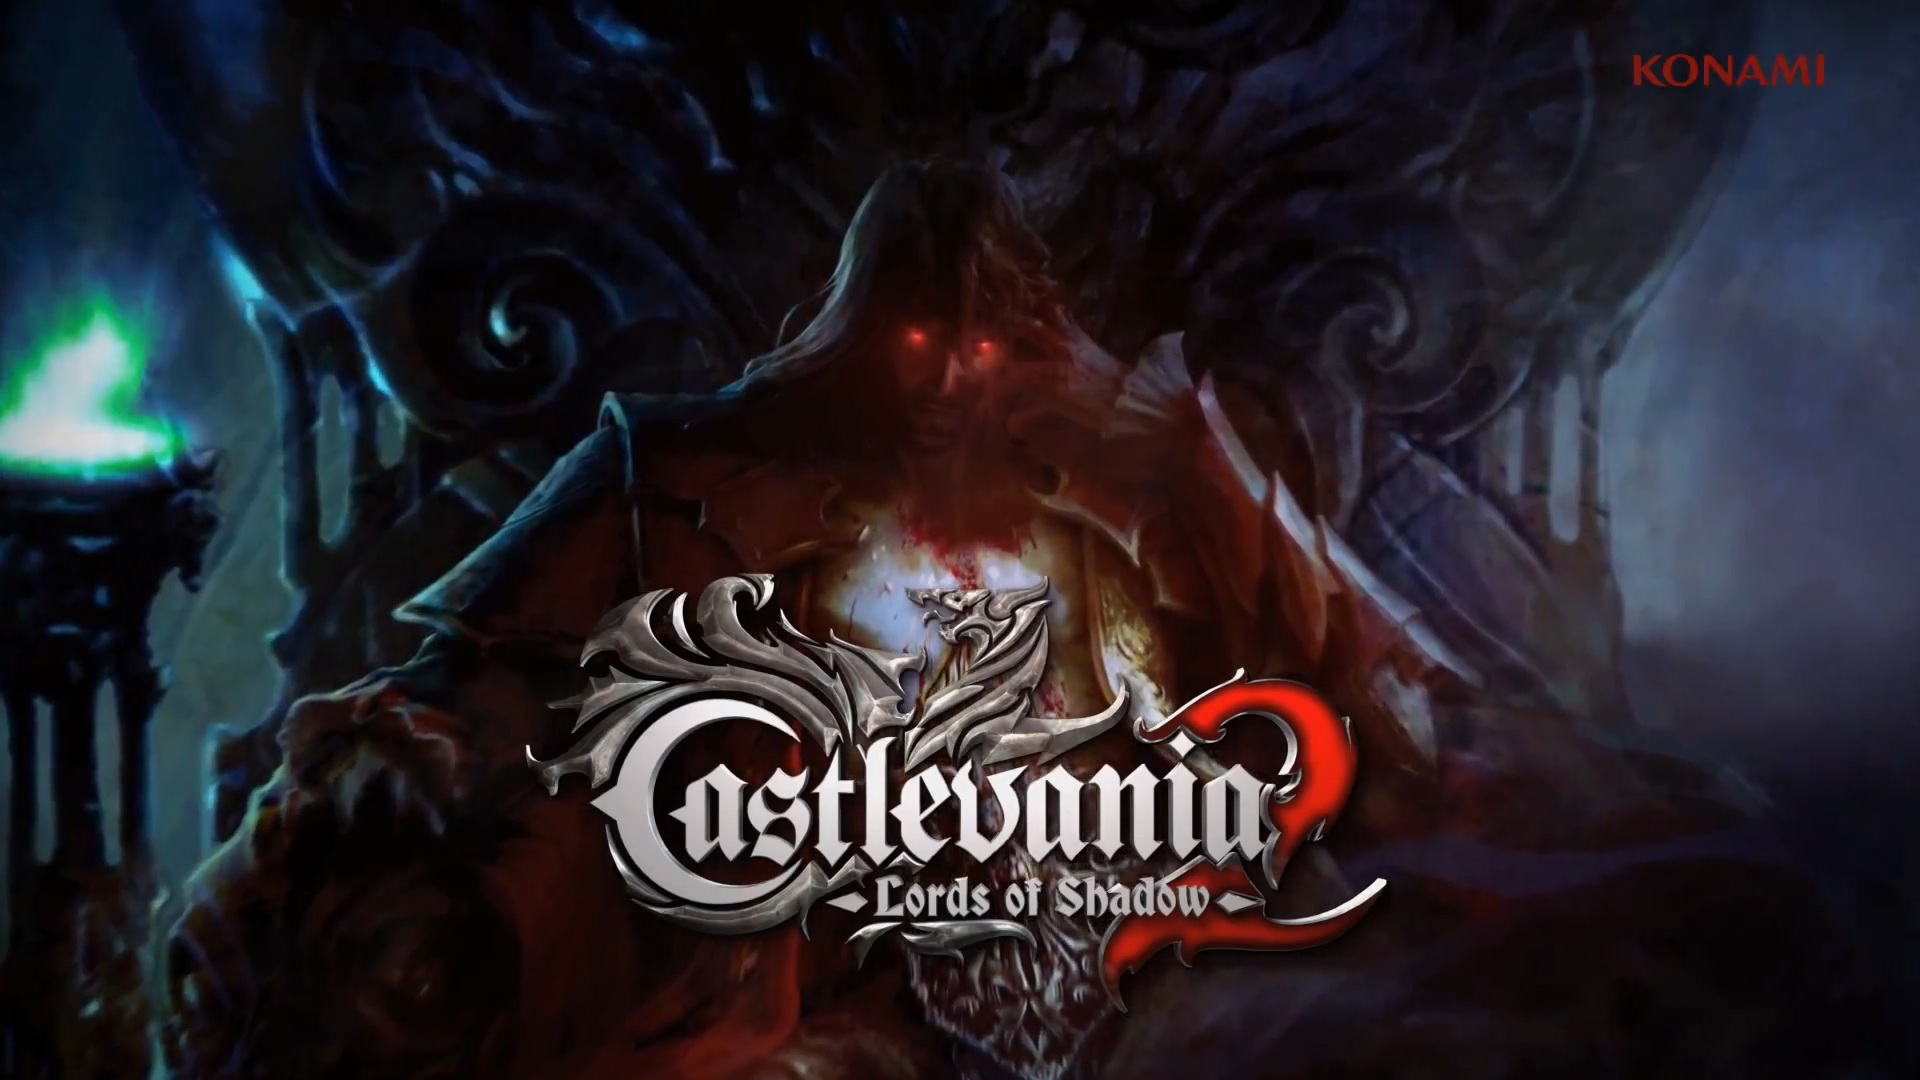 Castlevania: Lords of Shadow 2 - Revelations (DLC) - PS3 (PSN